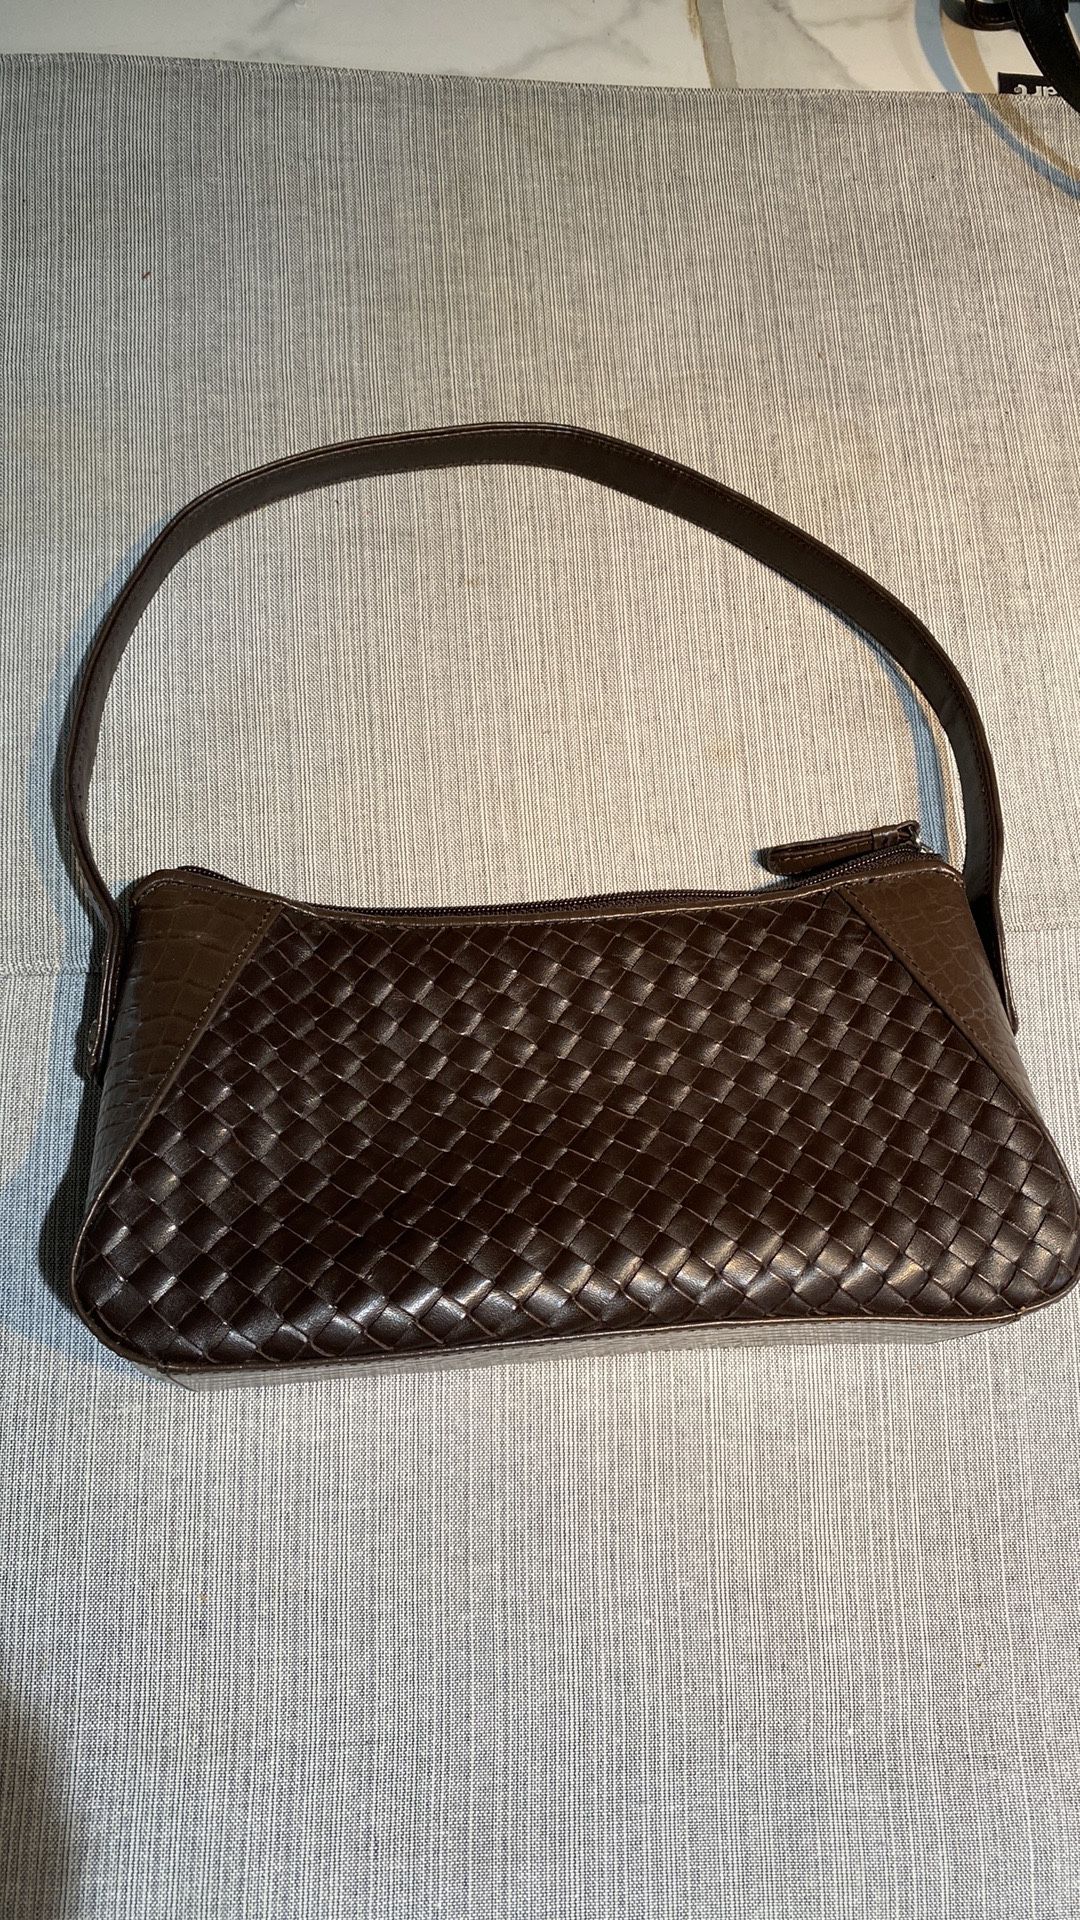 Never Used Brown Leather Purse